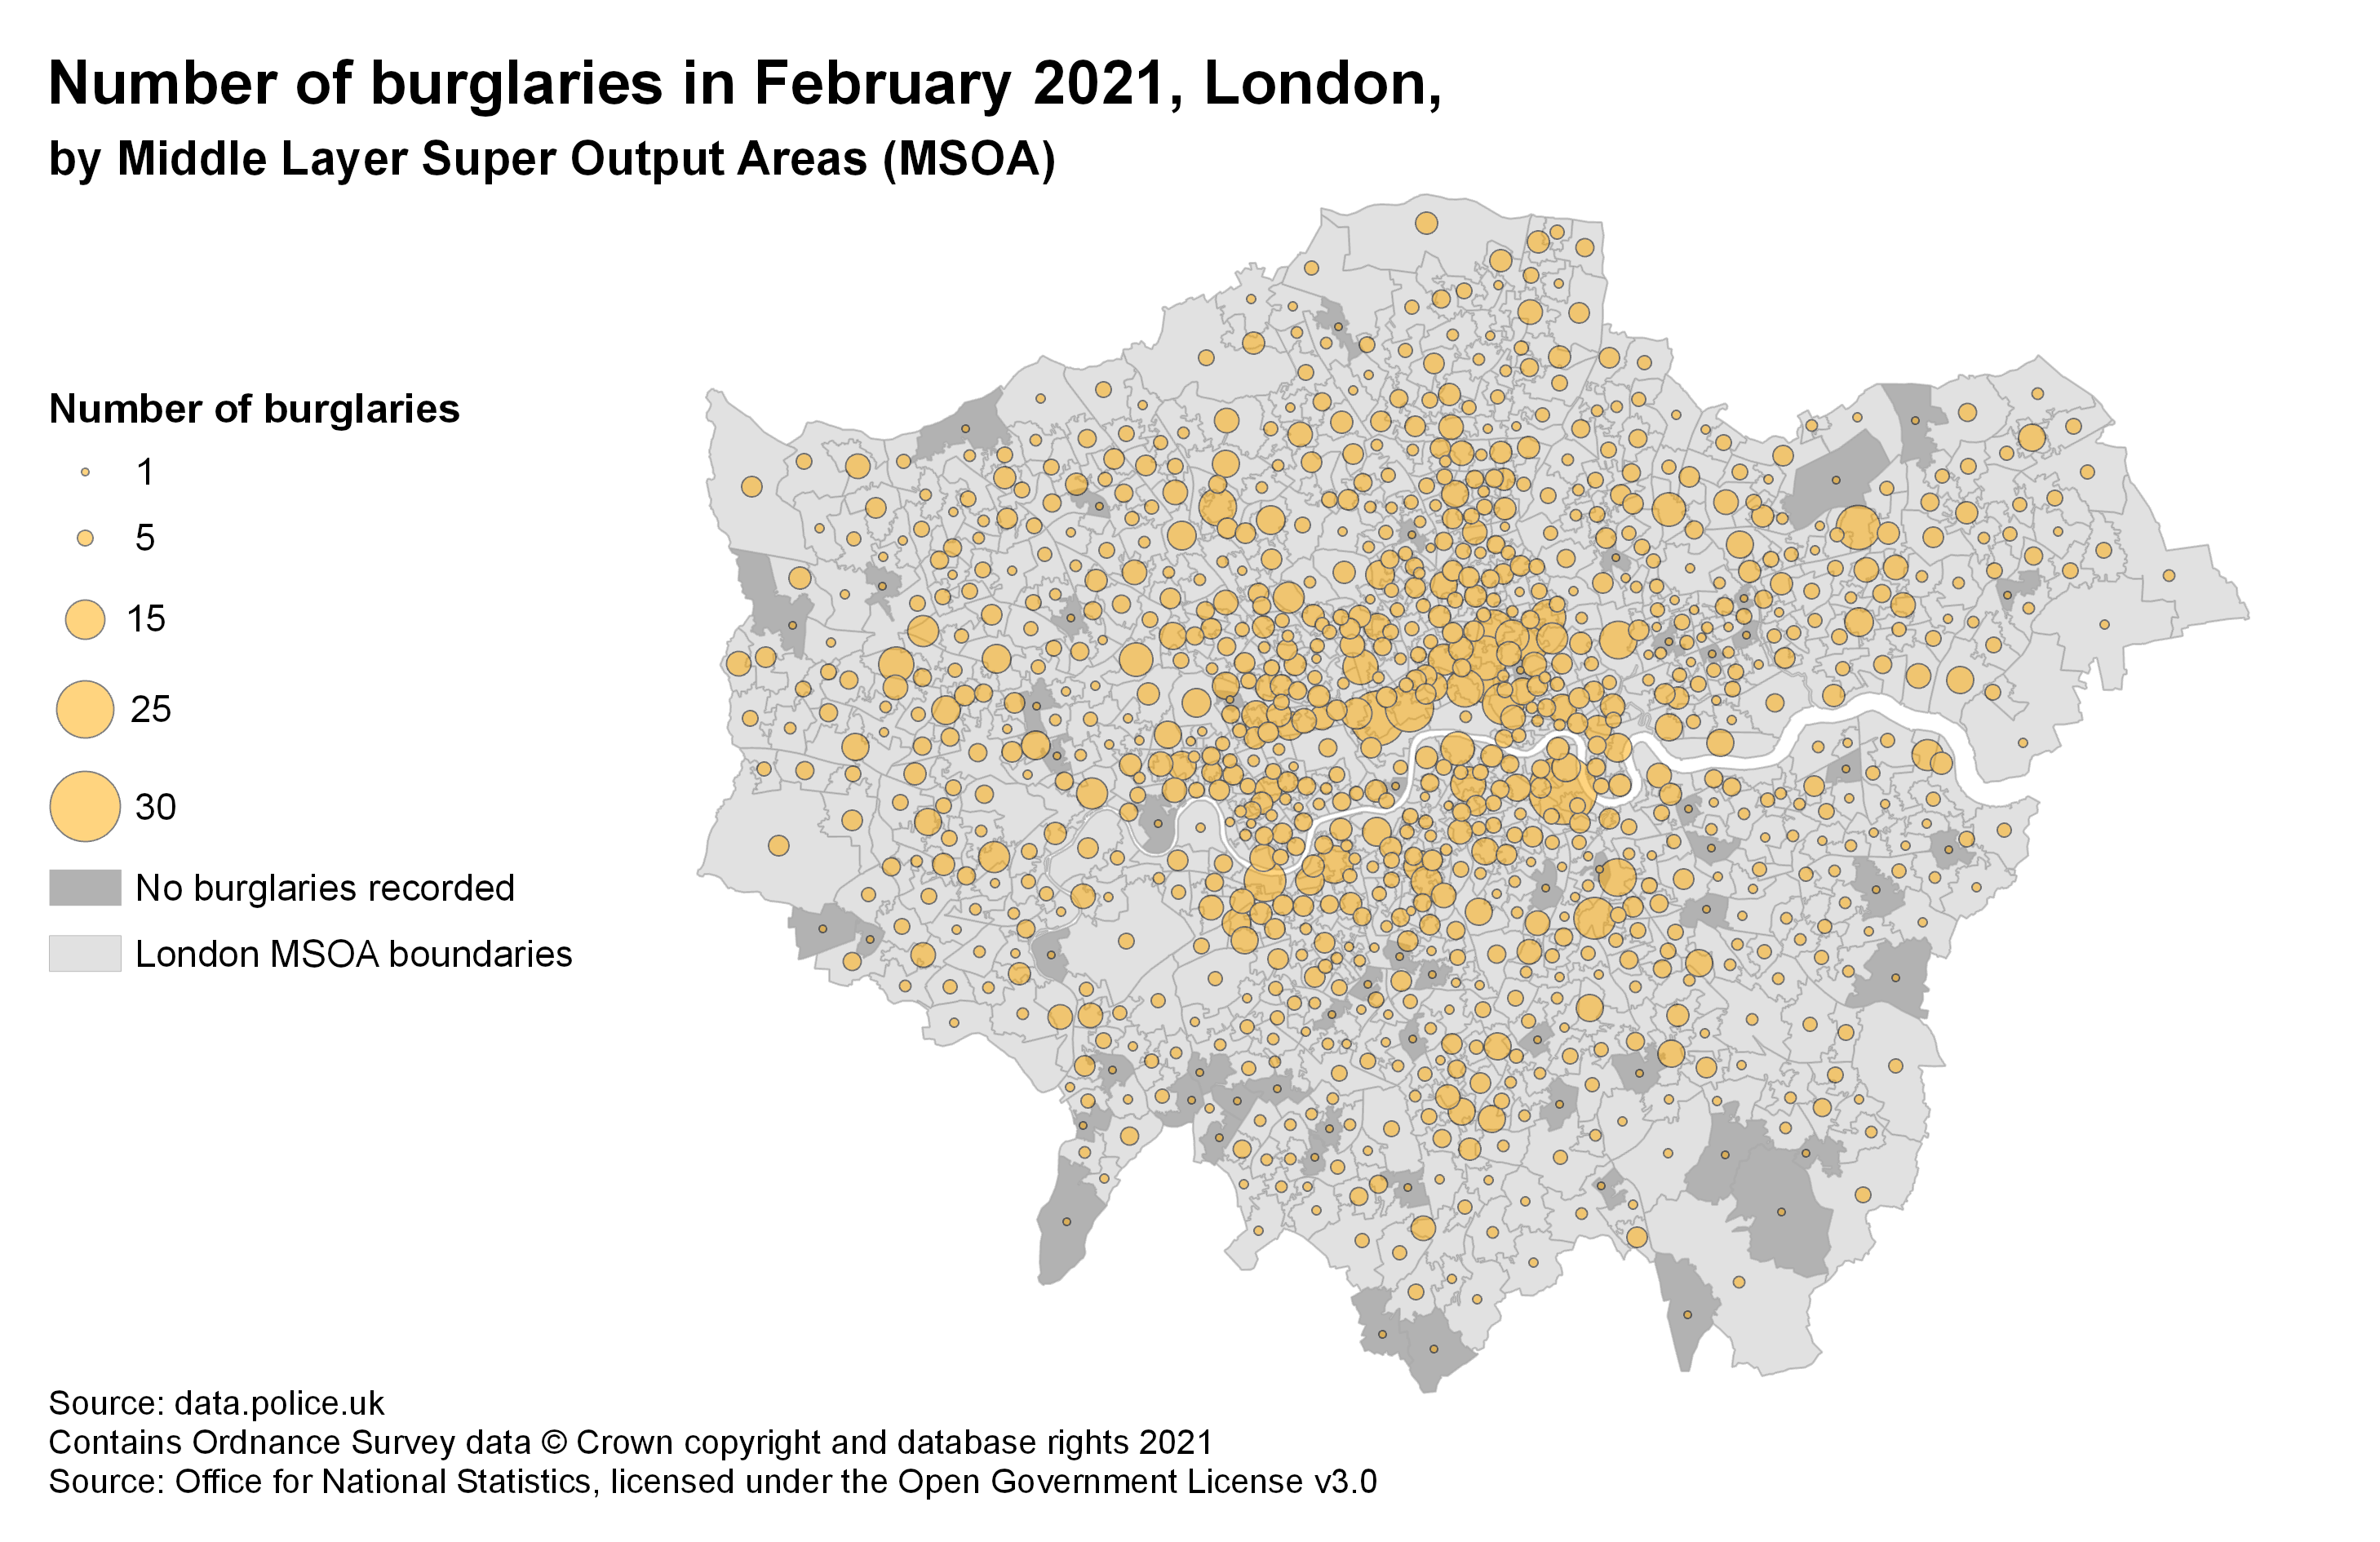 A good version of a map showing burglaries in London.